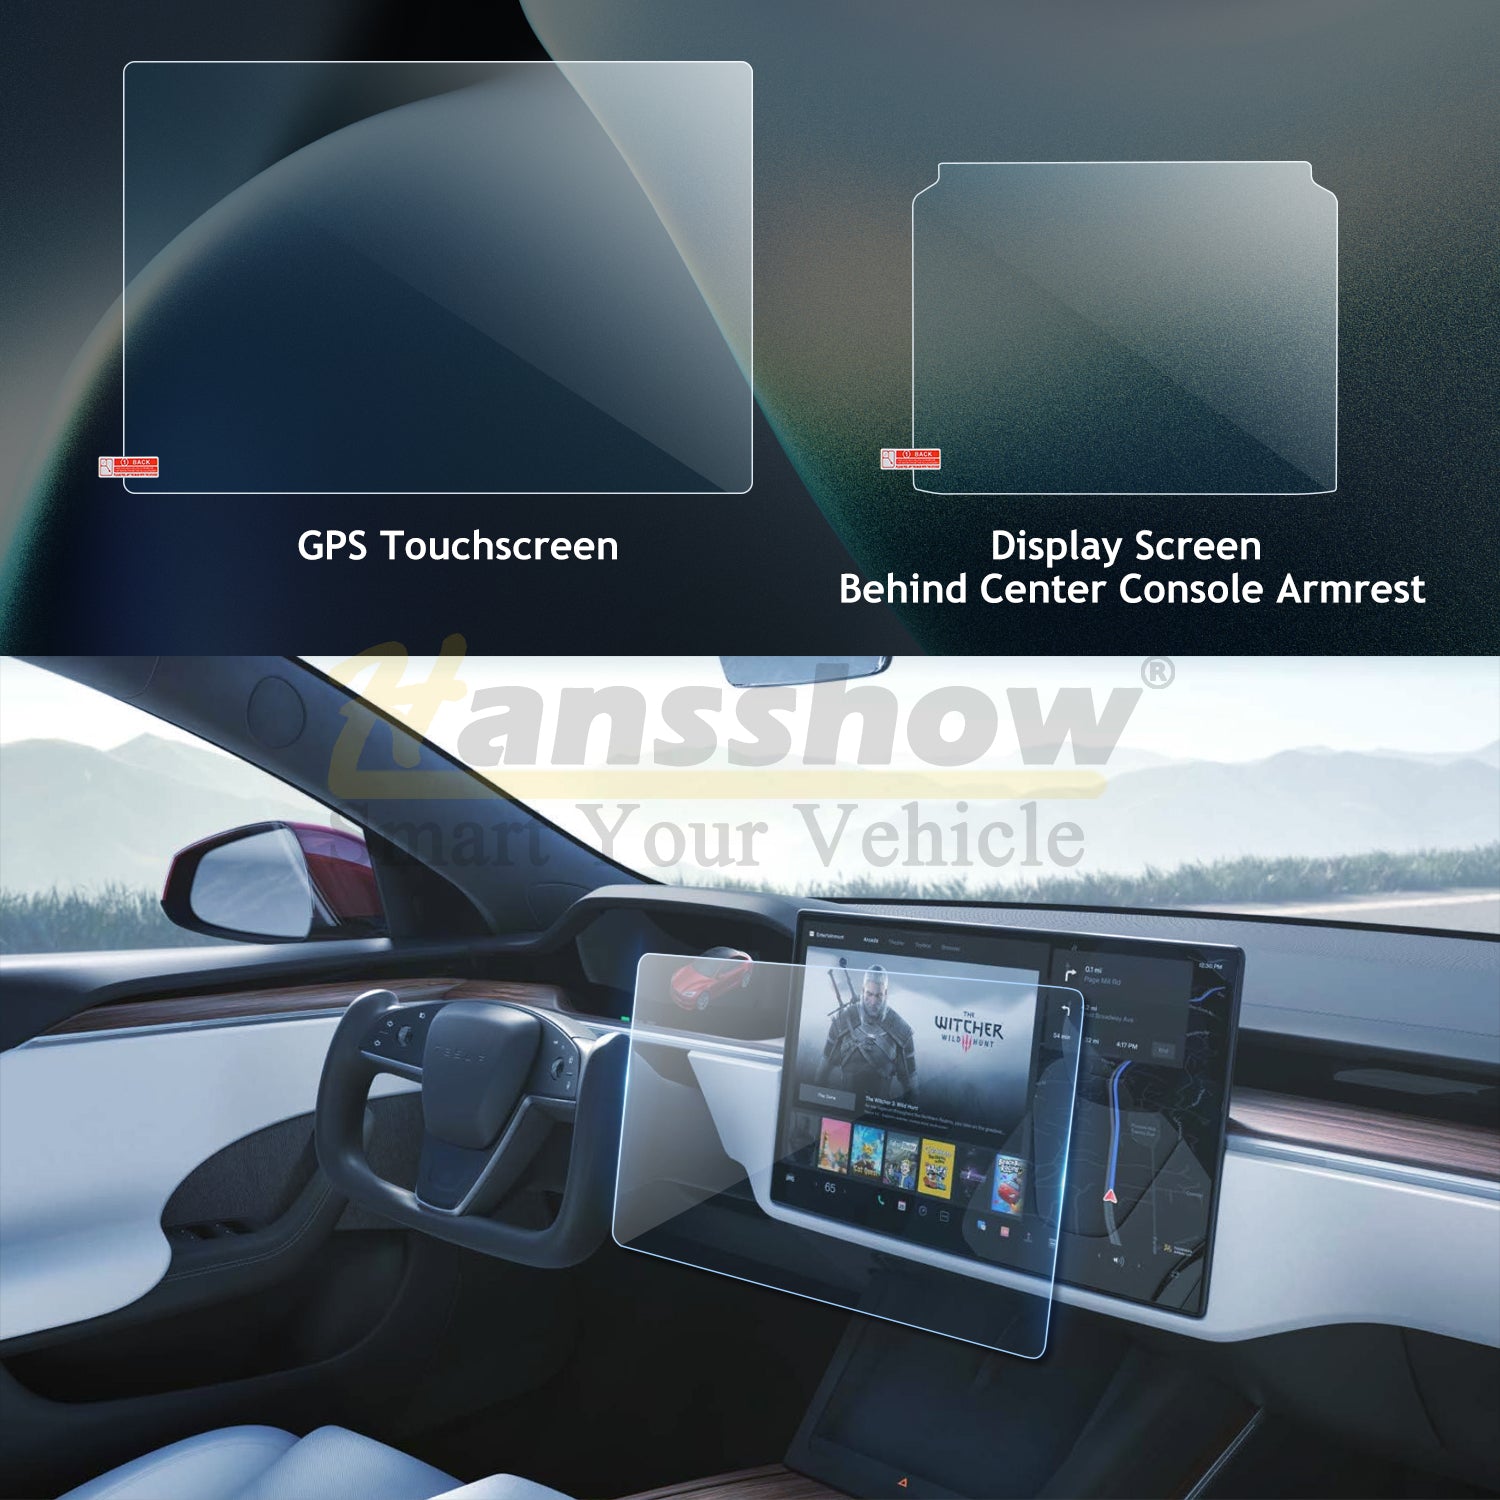 Model 3/Y Tempered Glass Screen Protector with auto-alignment mount kit